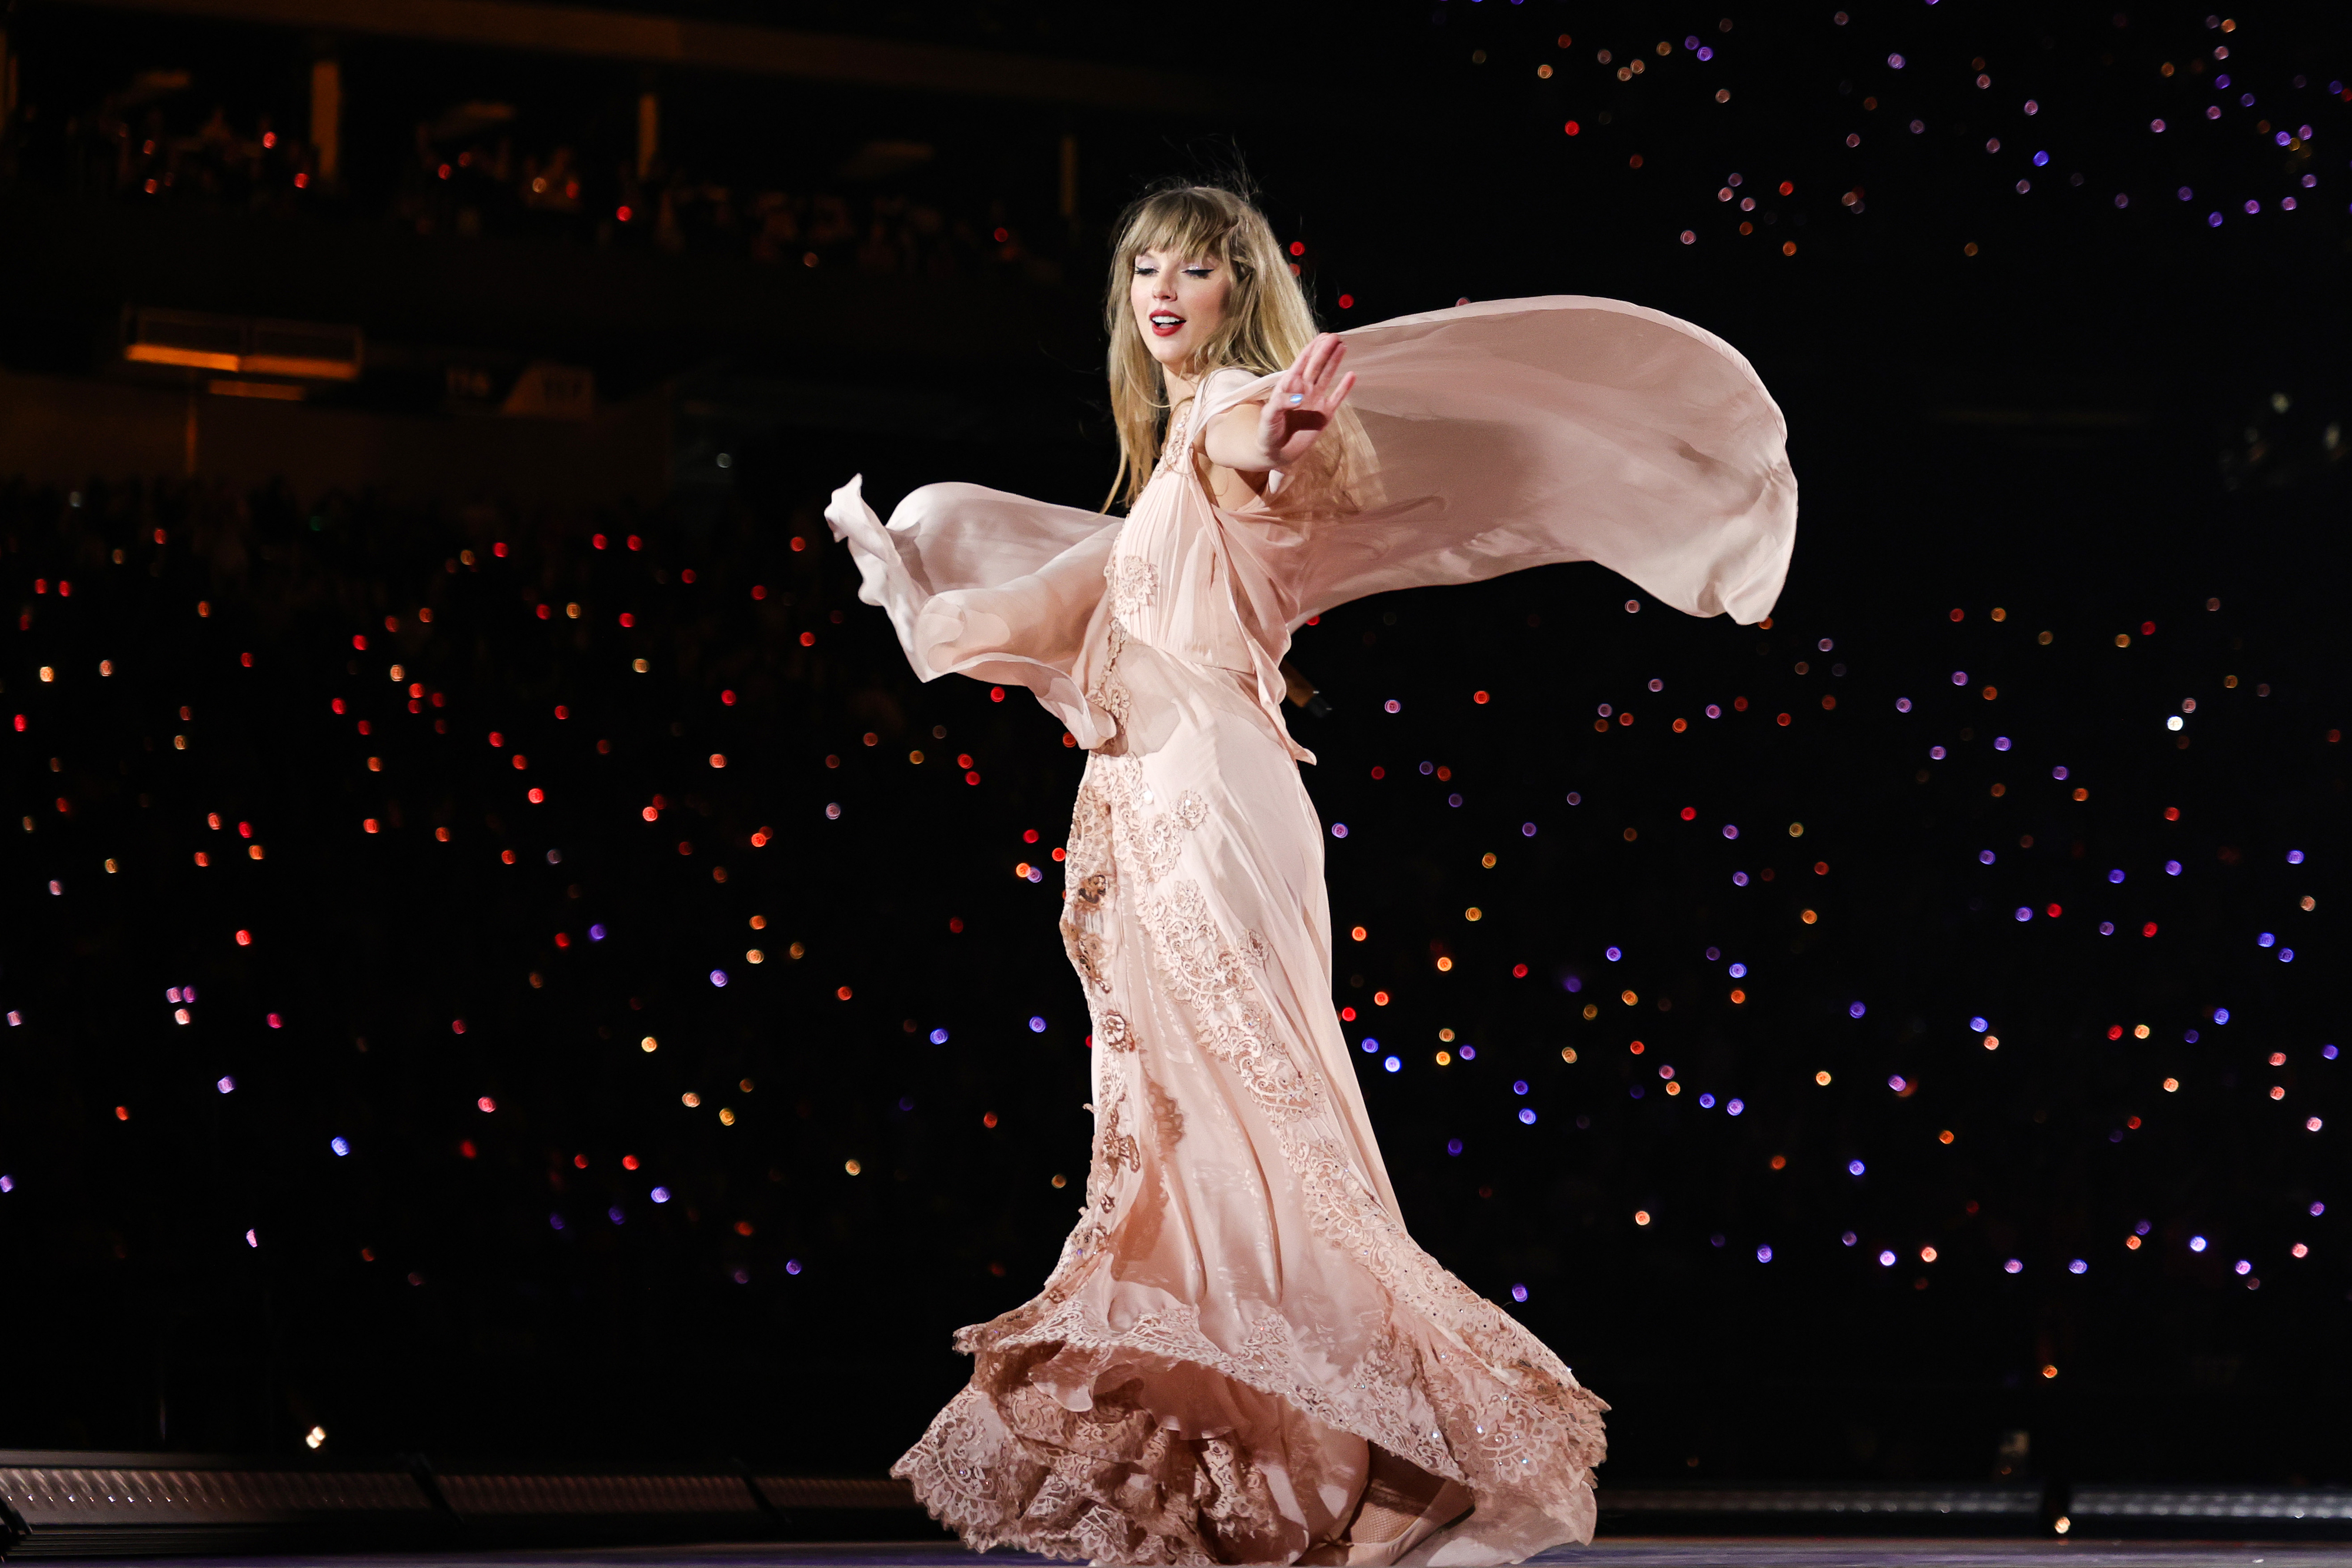 Taylor performing onstage in a gown